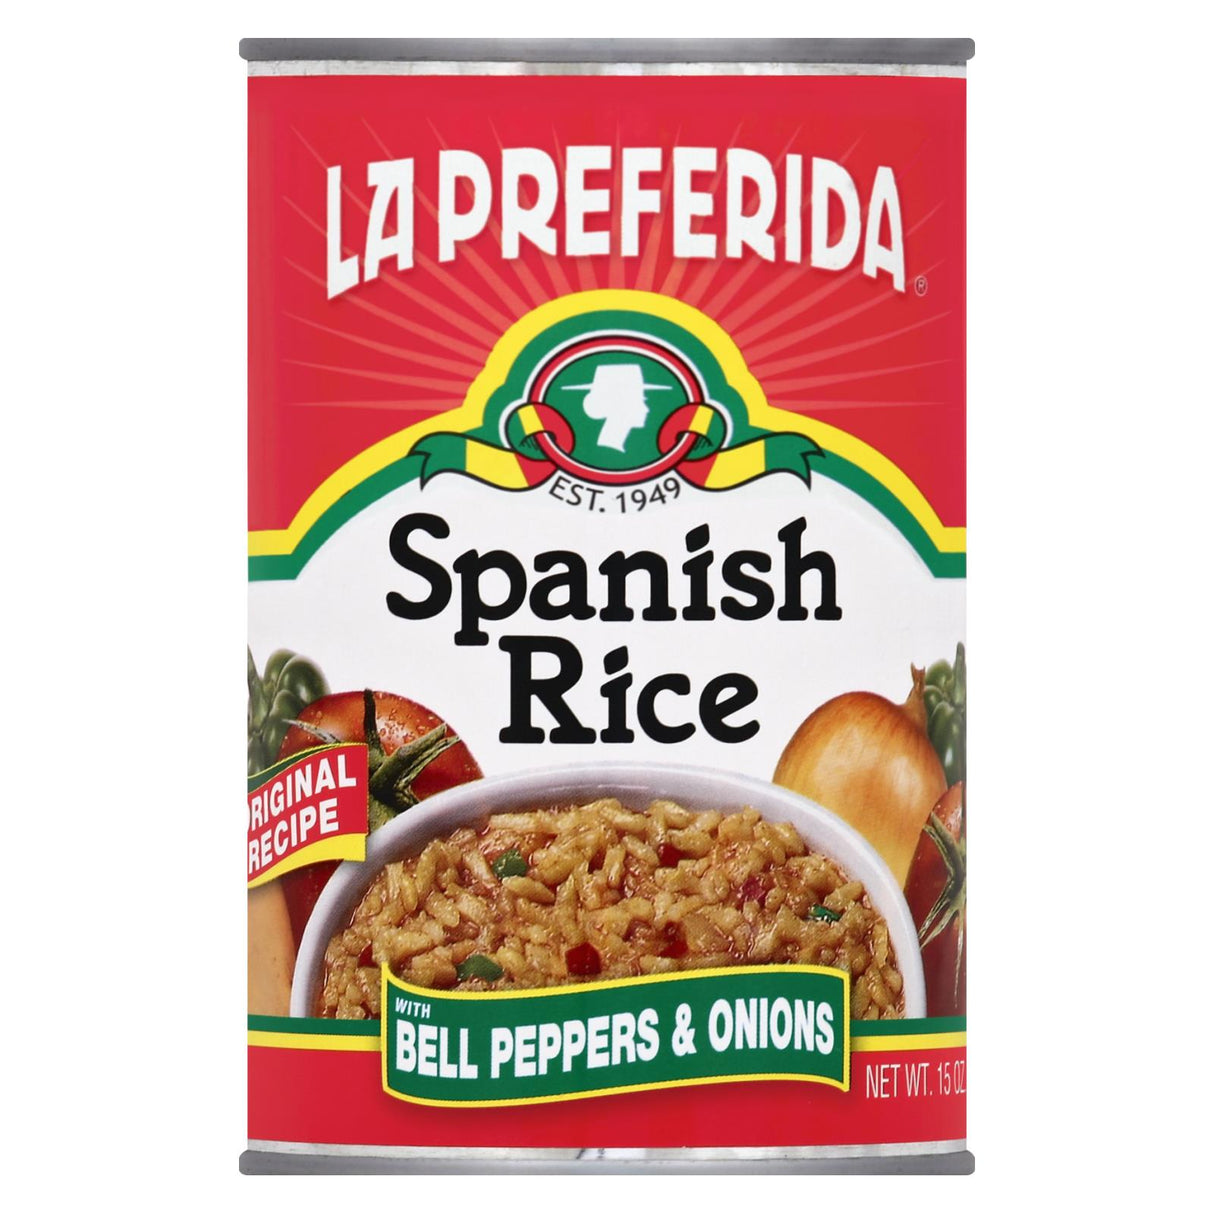 La Preferida Spanish Rice with Bell Peppers & Onions - 12 Pack, 15 Oz Each - Cozy Farm 